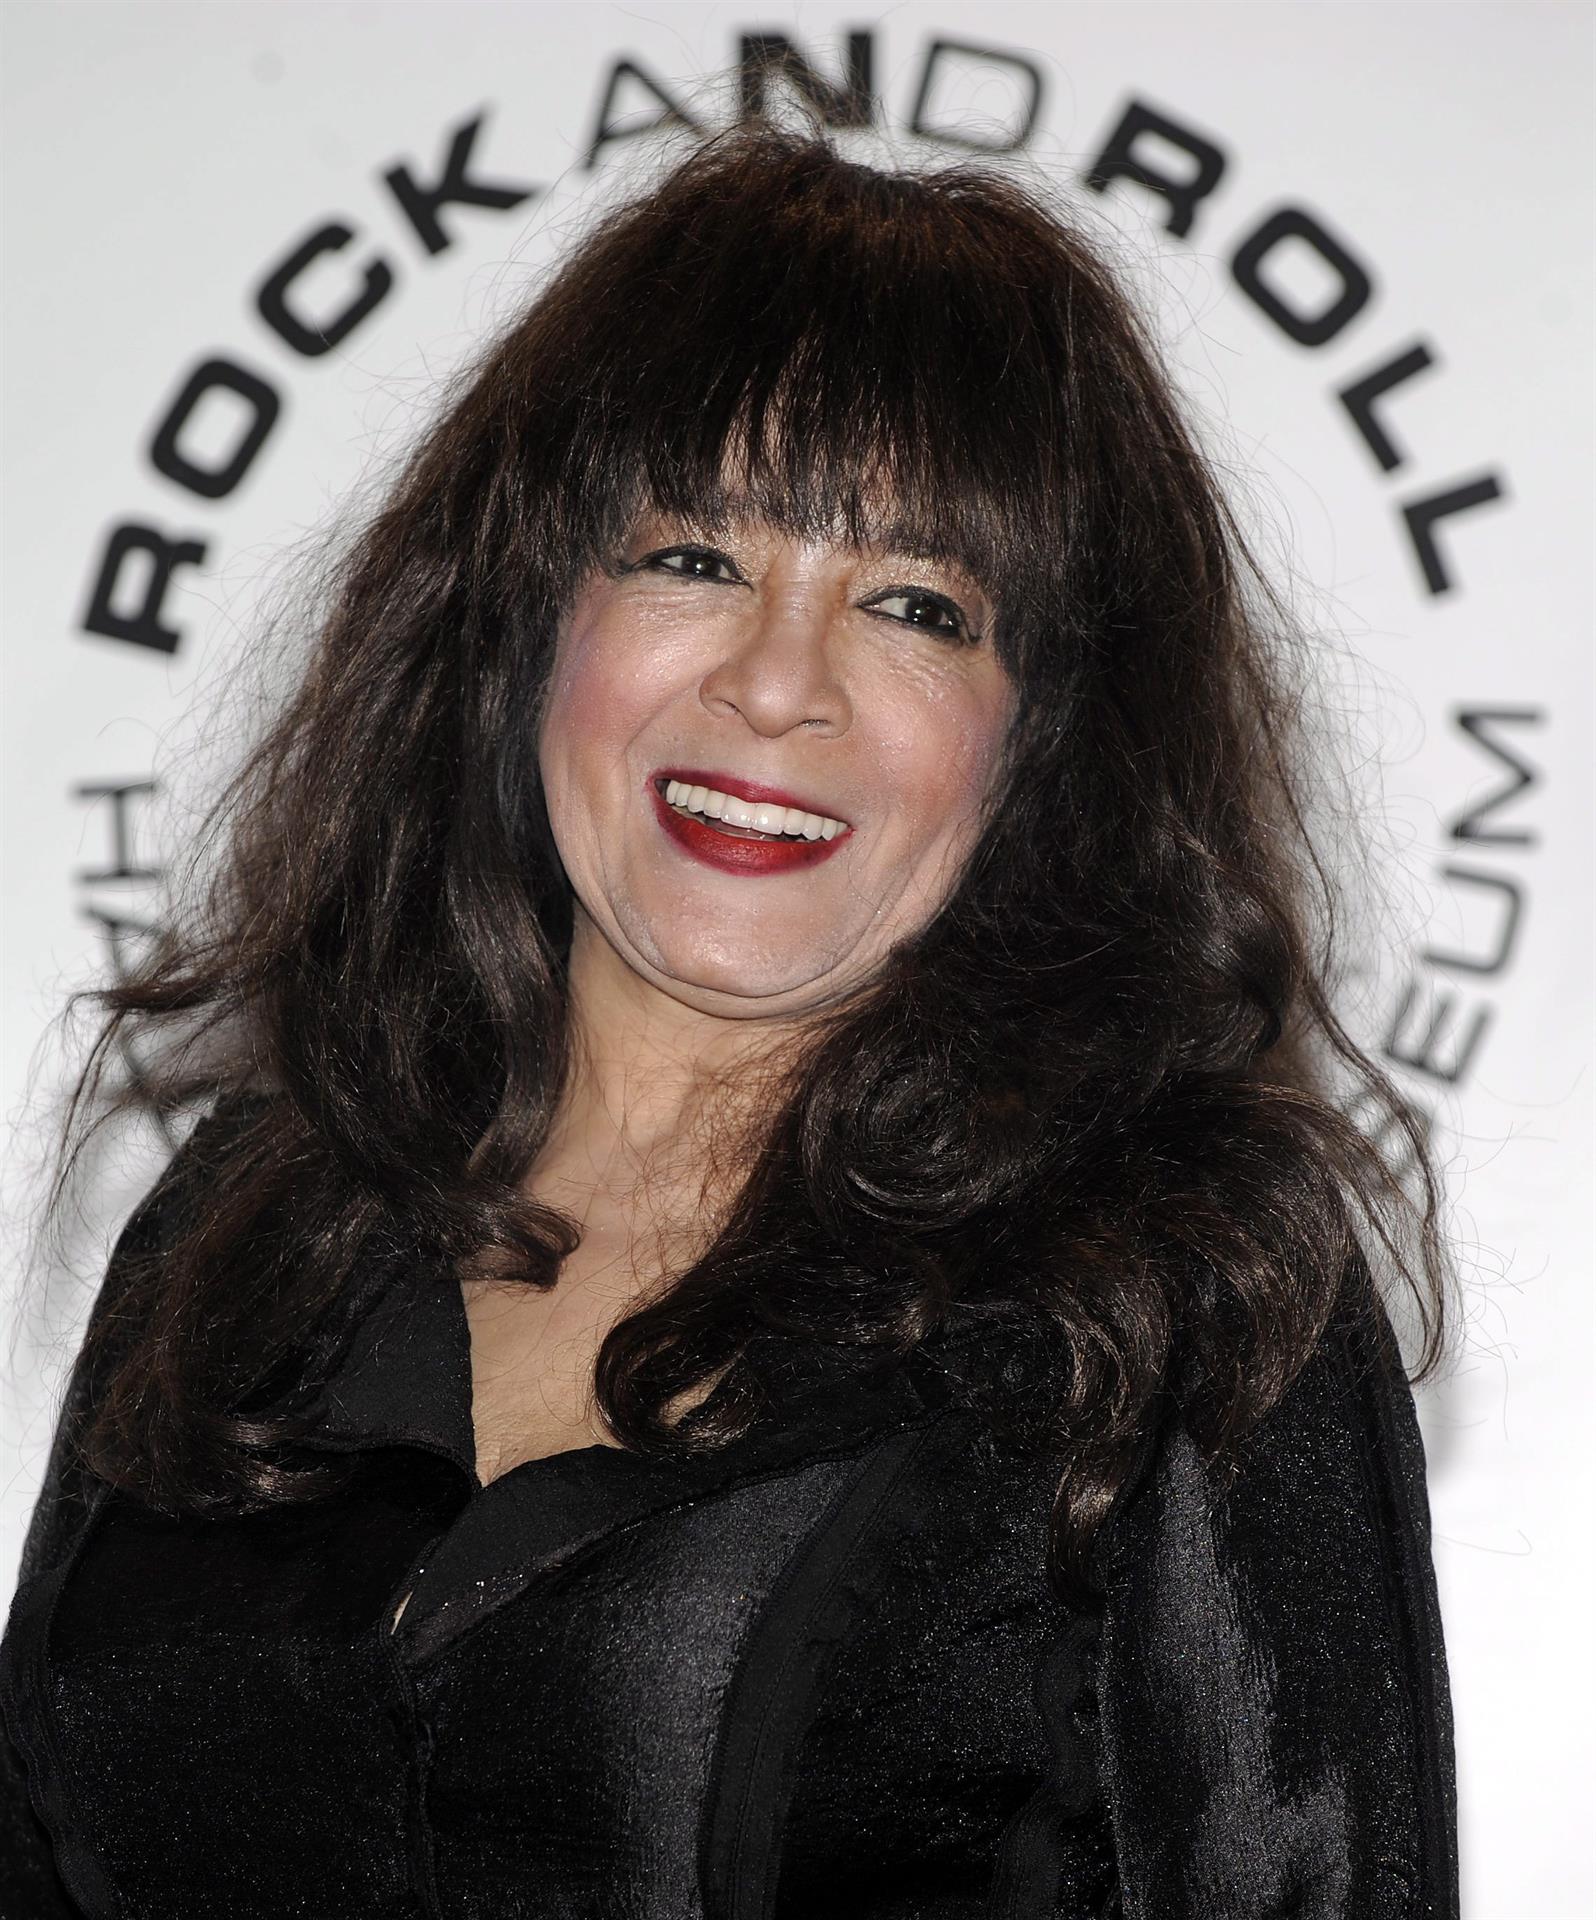 Ronnie Spector, founder of famed girl group The Ronettes, dies of cancer thumbnail